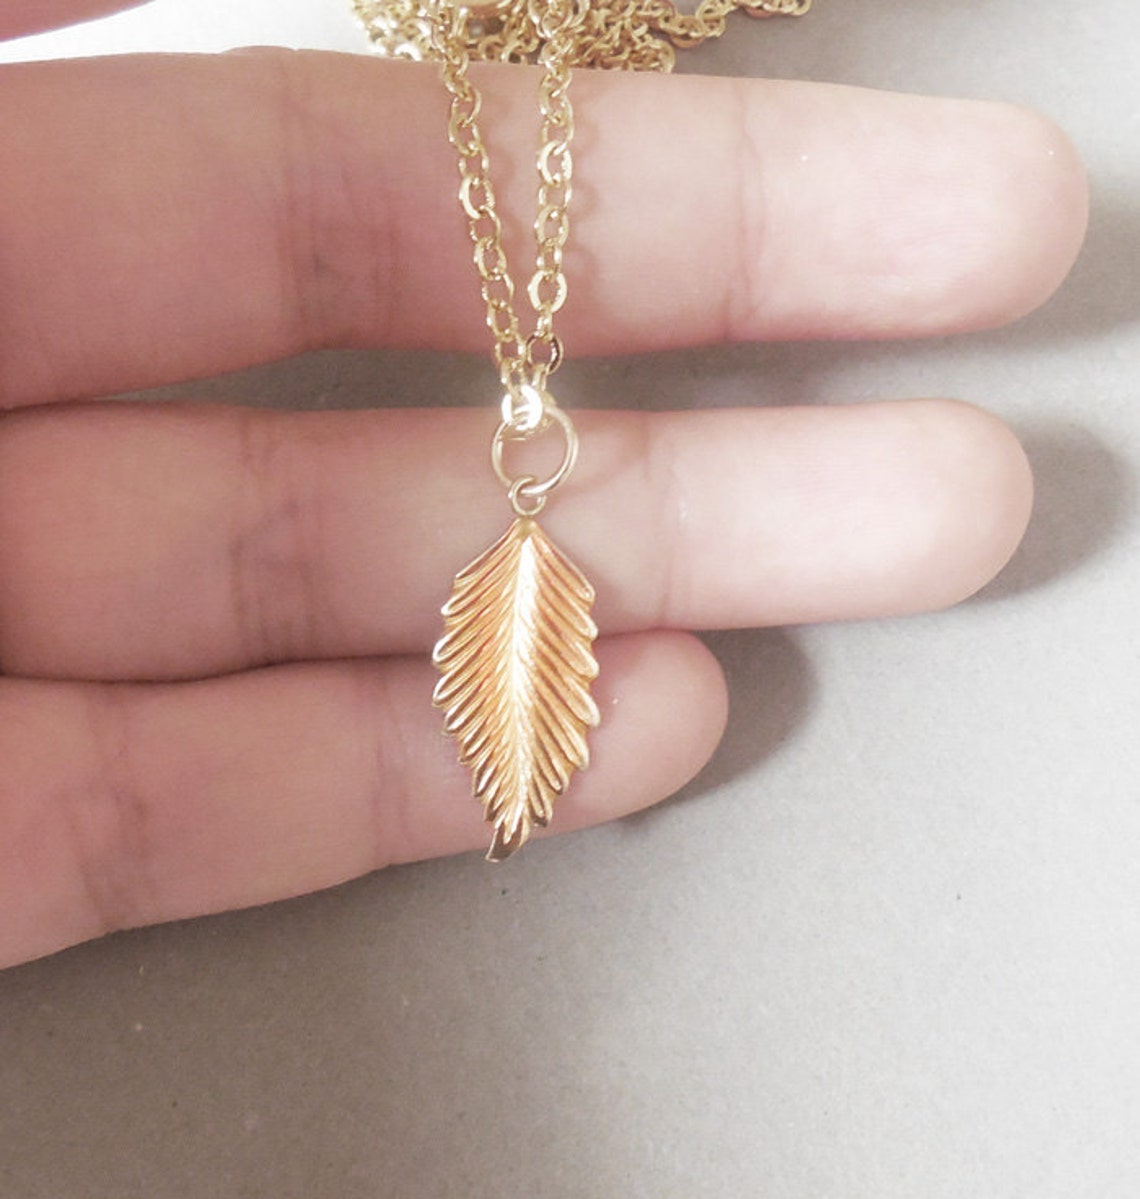 Tiny Gold Leaf Necklace in Gold Filled Sterling Silver - Etsy